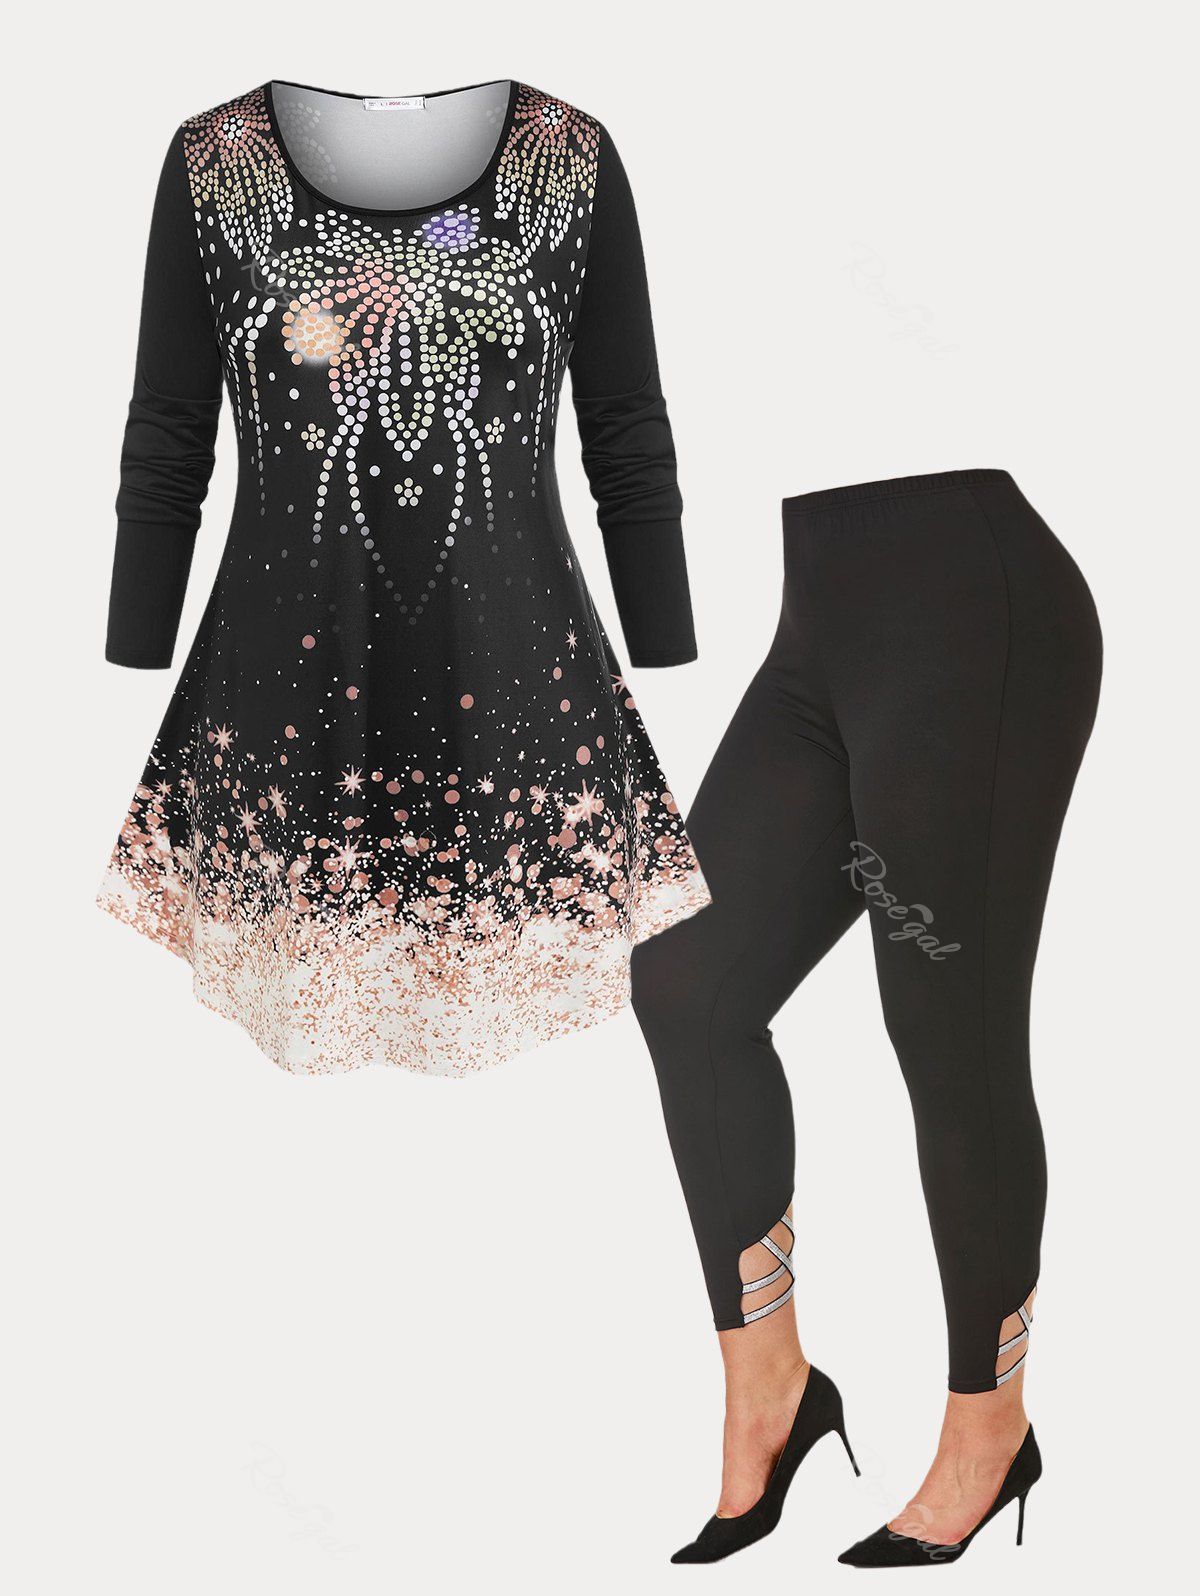 Shops Sparkling Me Firework Swing Top and Crisscross Ninth Leggings Plus Size Outfit  